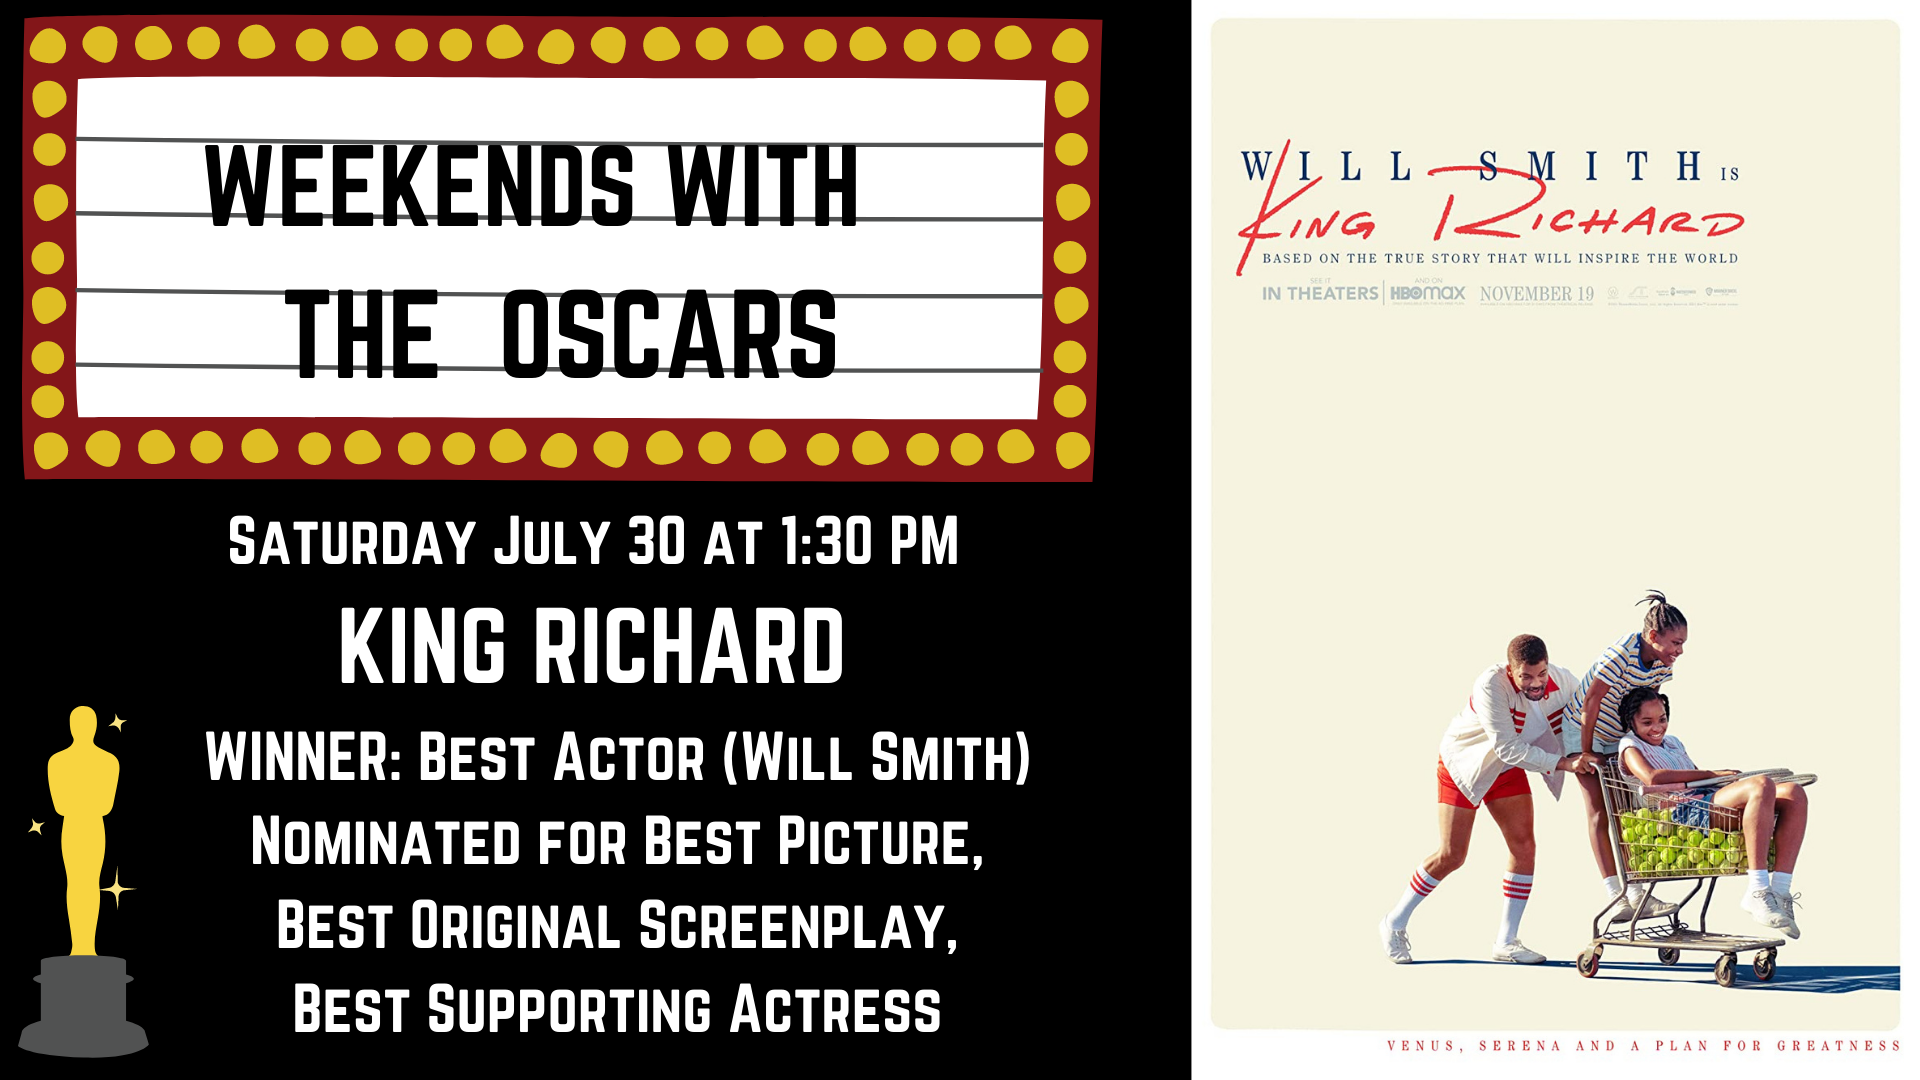 Banner advertising our screening of KING RICHARD on July 30 at 1:30 PM, featuring the movie poster.